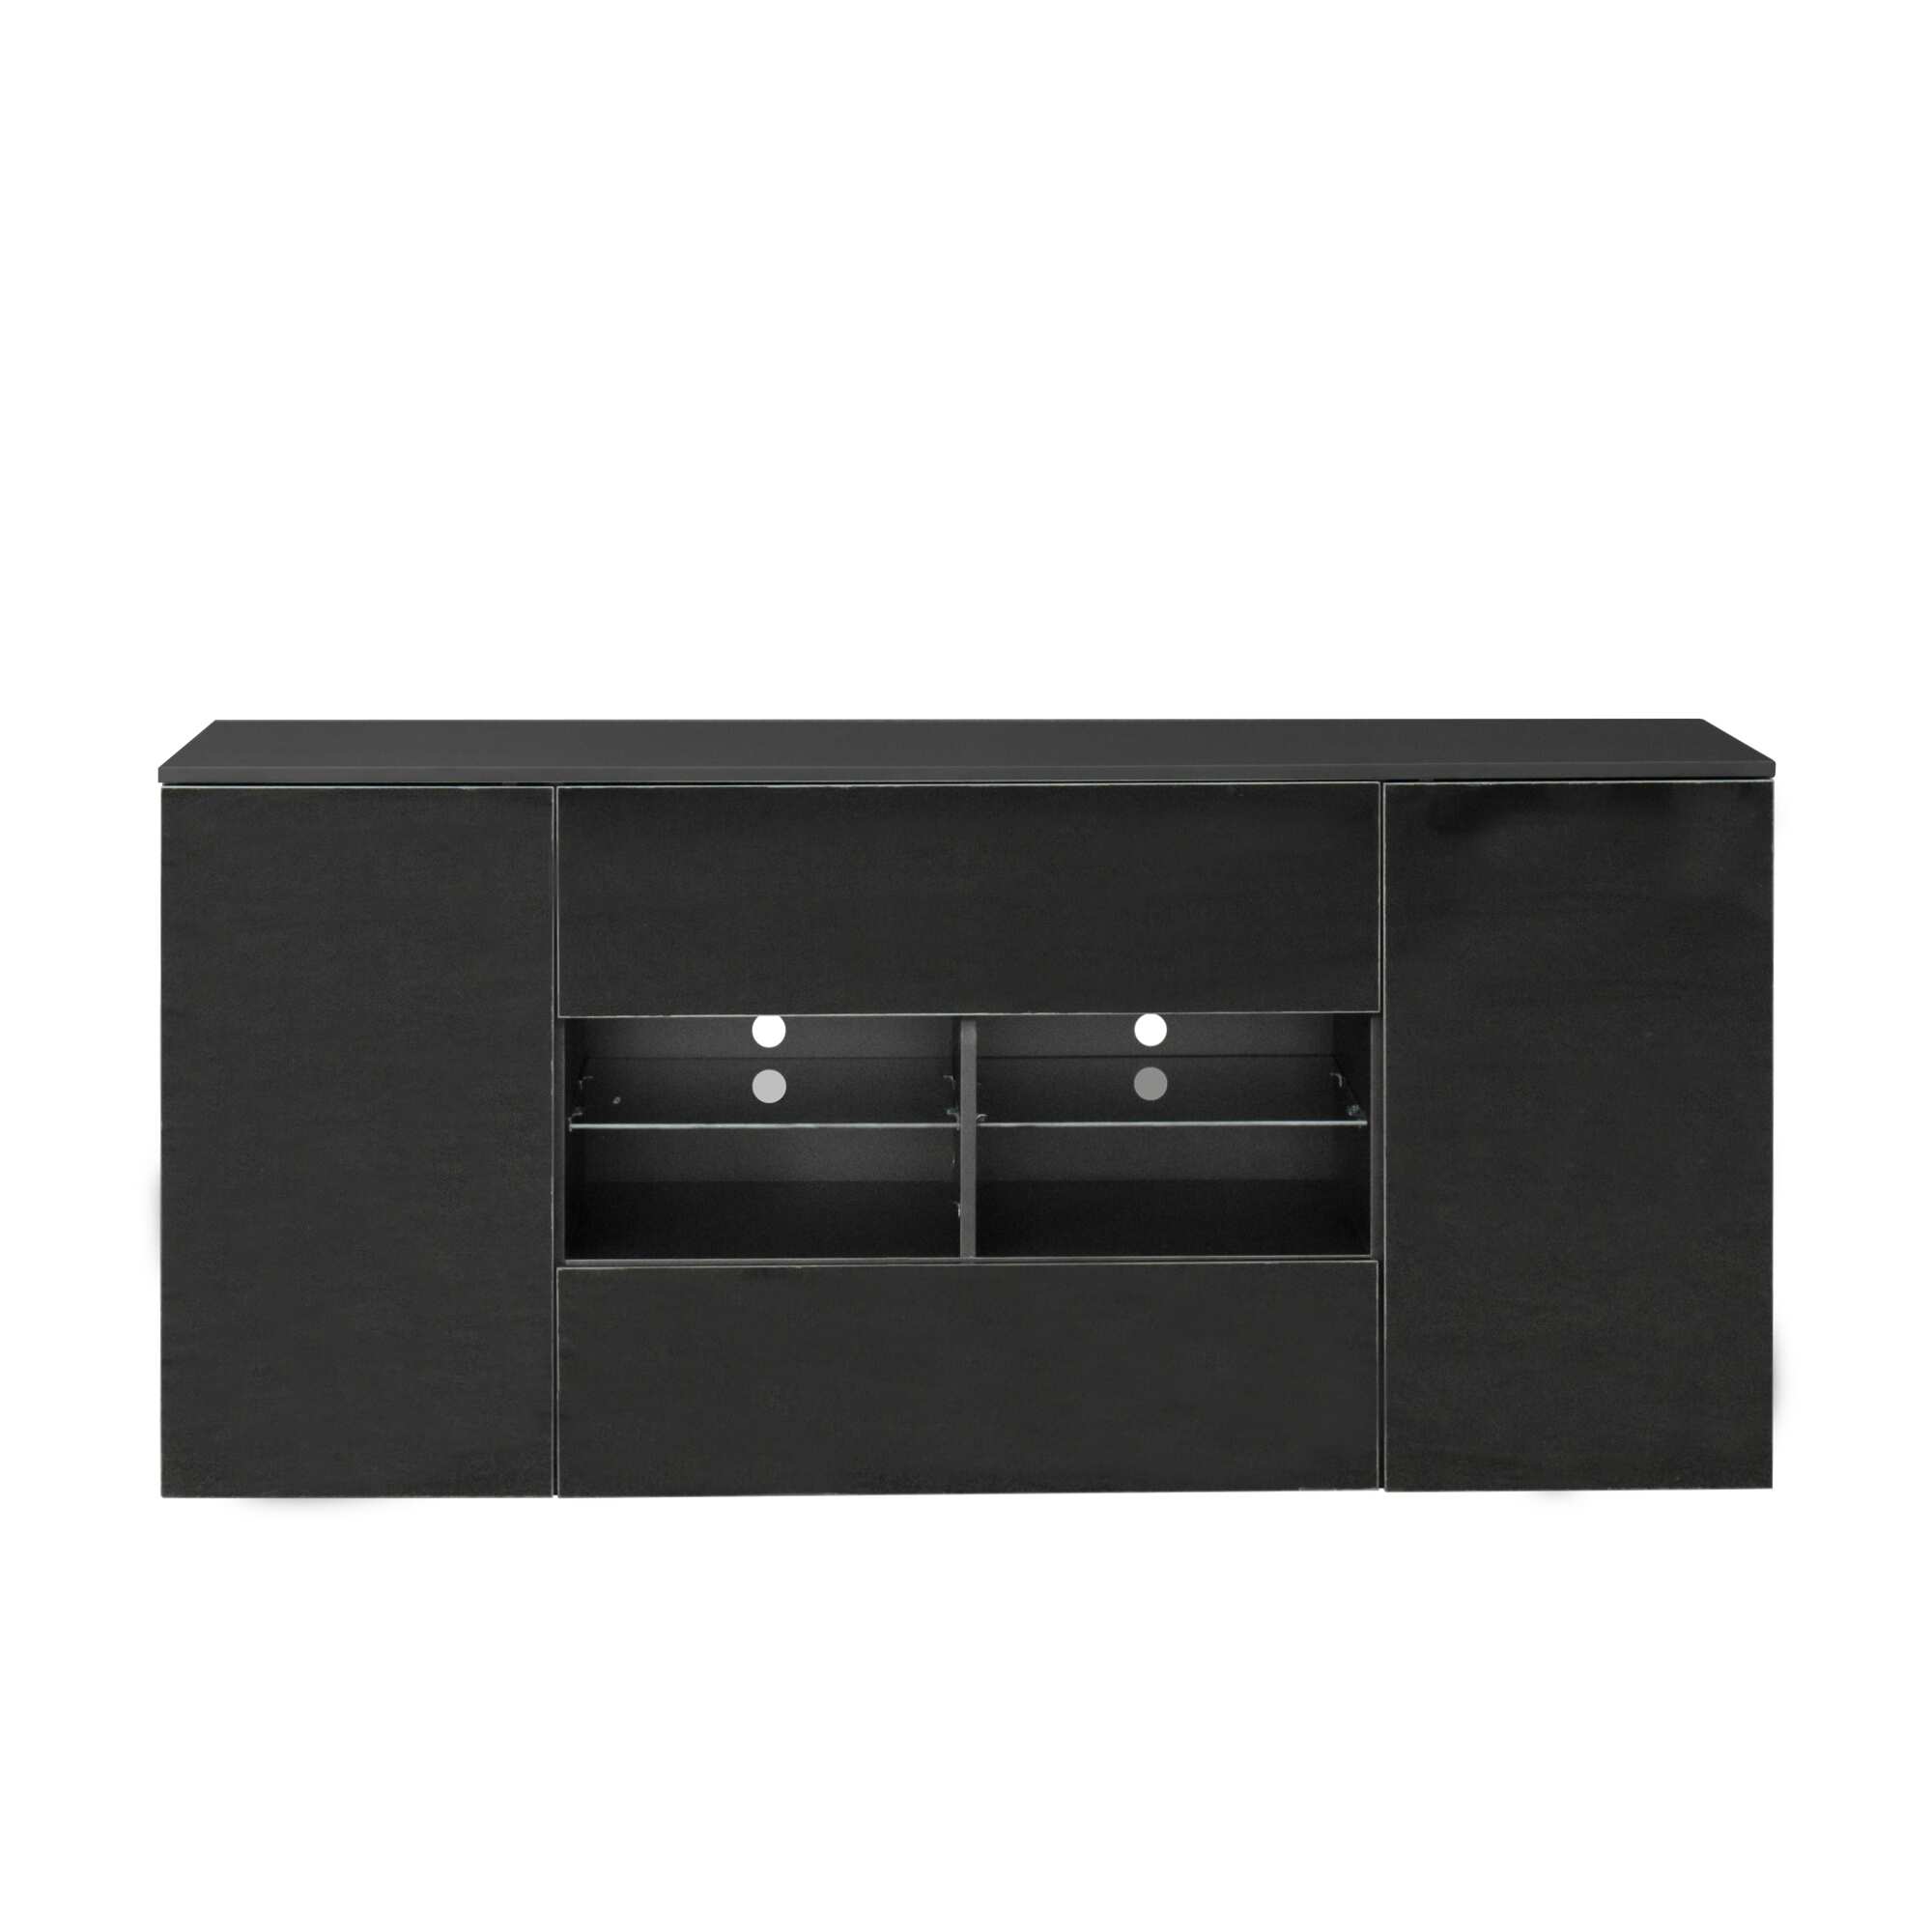 Black TV Cabinet Side Cabinet Entertainment Units with Double Doors and Drawers Suitable TV Console for Living Room